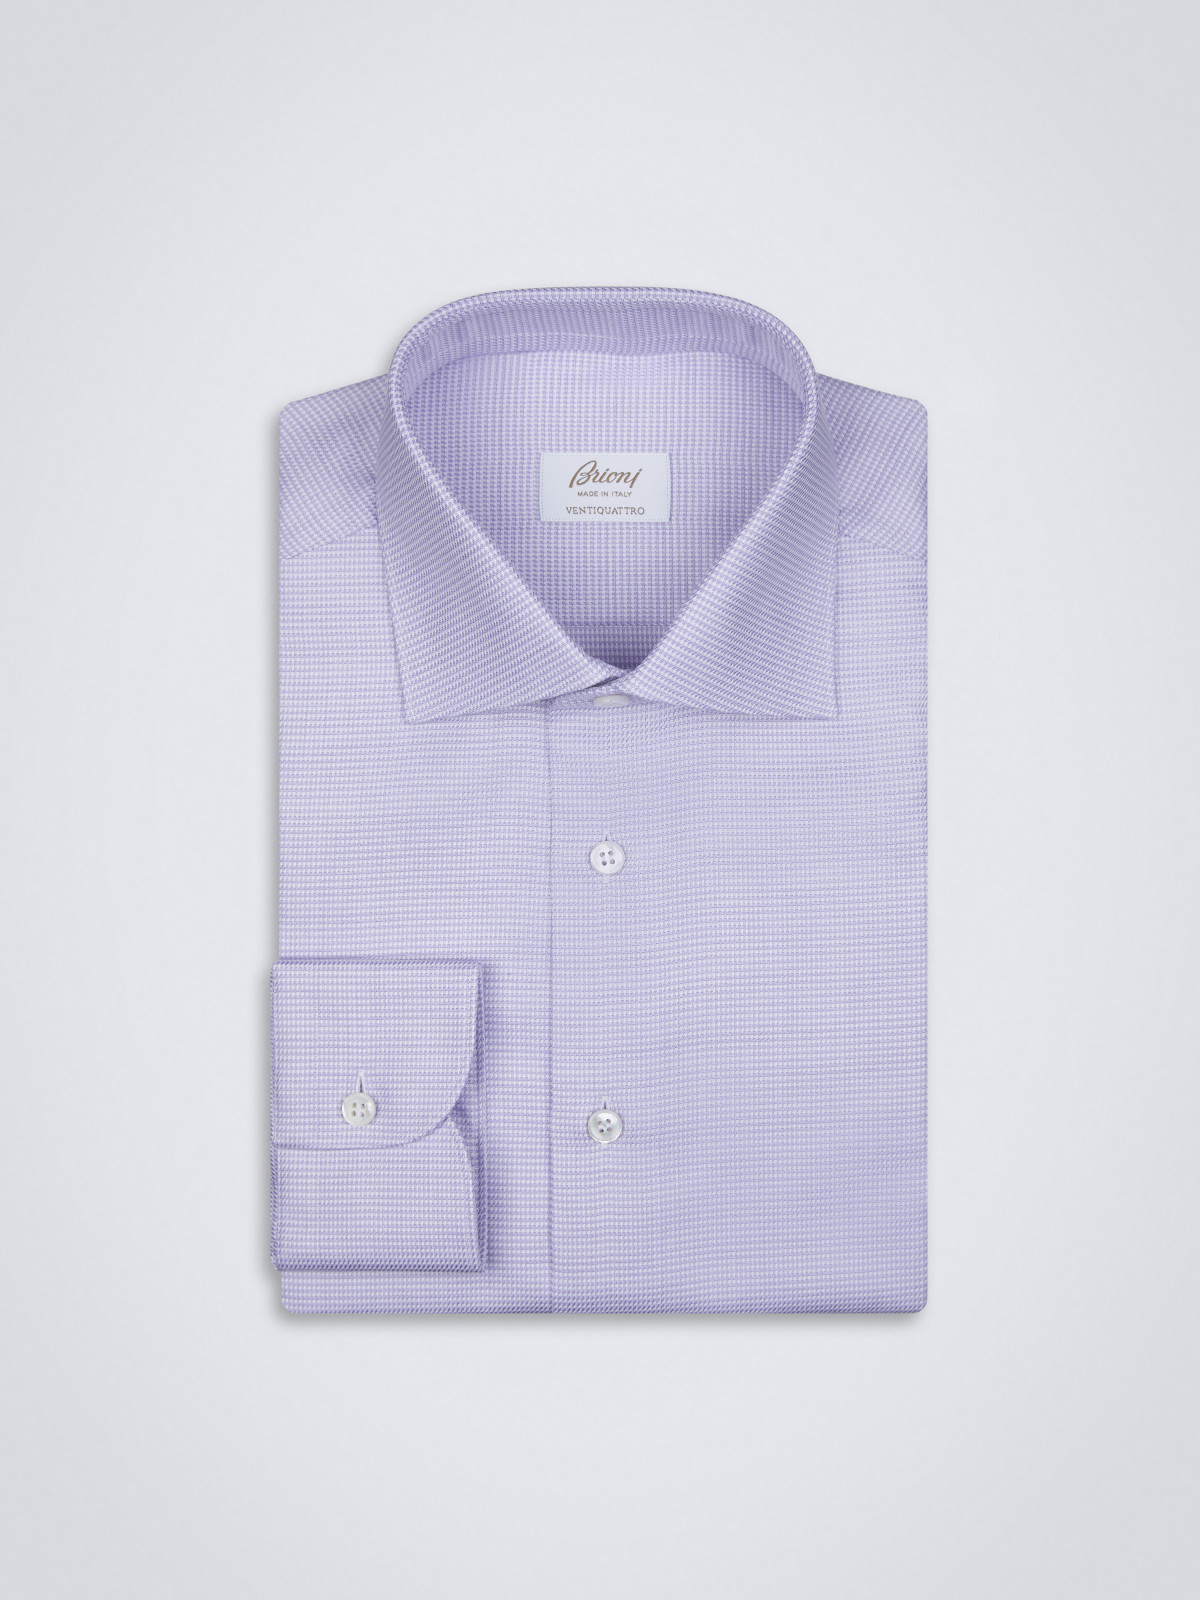 Lilac and white sustainable Ventiquattro cotton formal shirt | Brioni ...